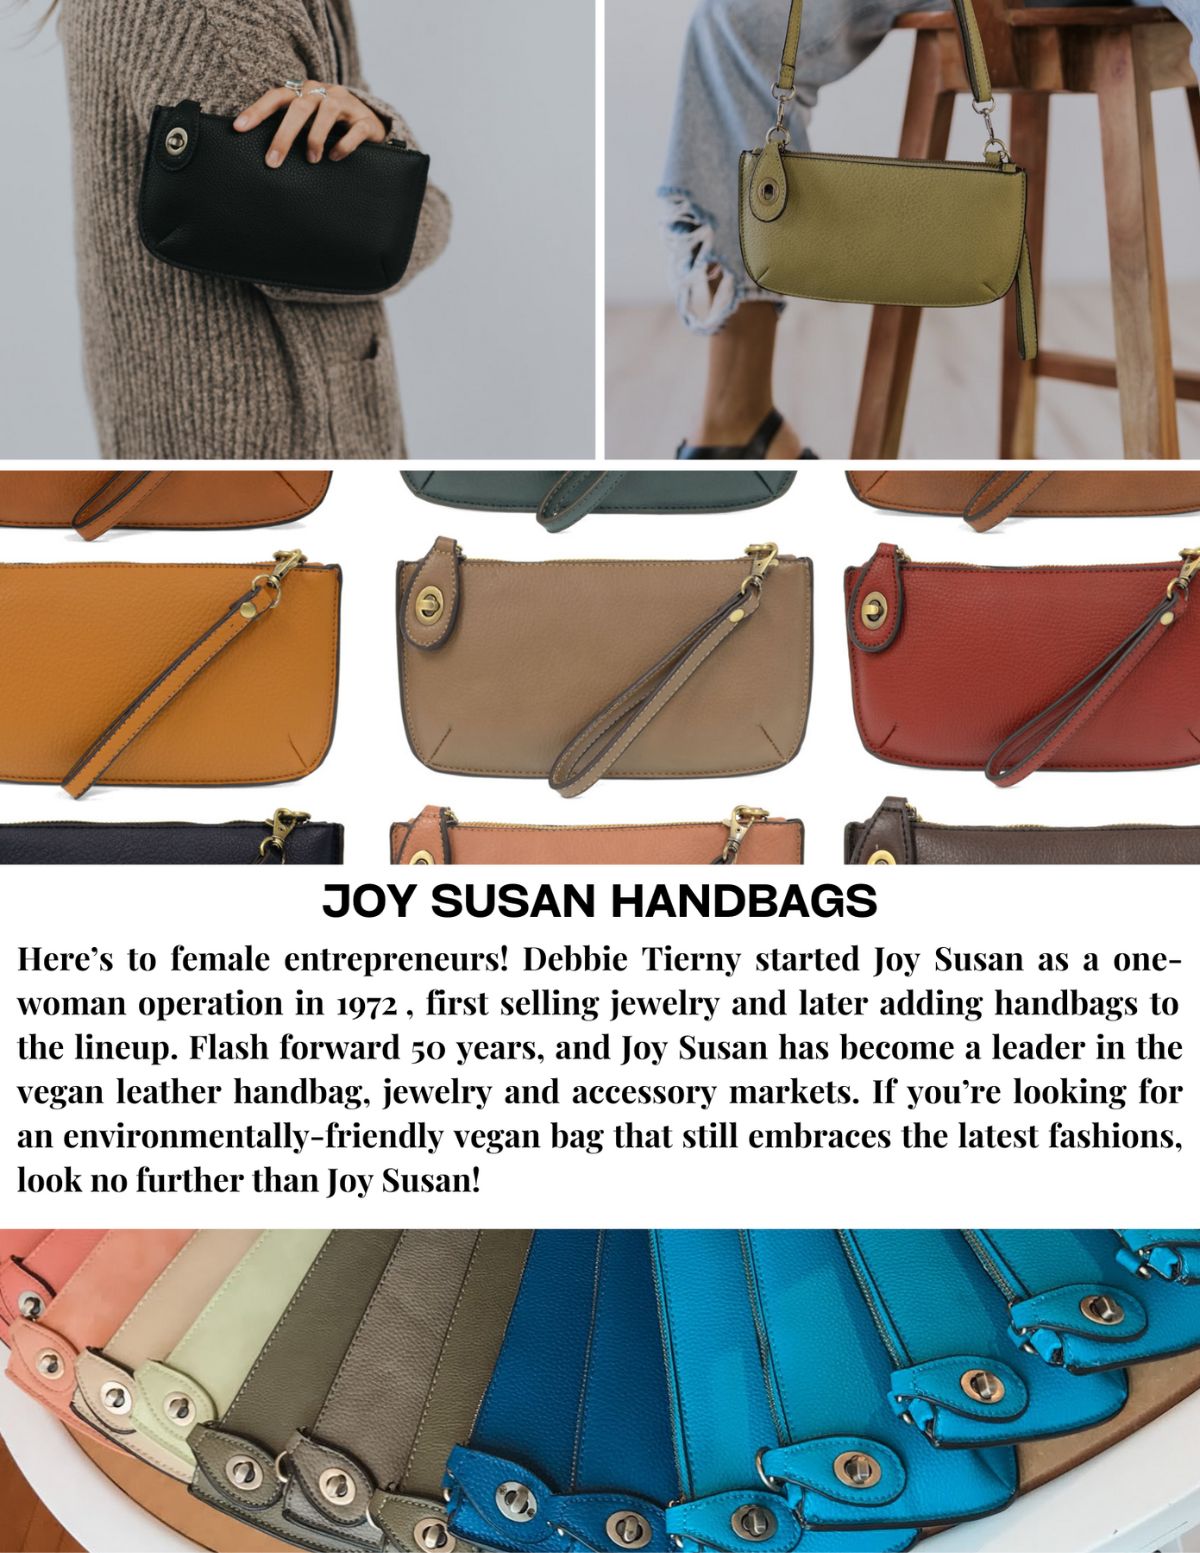 New Joy Susan Handbags in lots of different colors at Willow